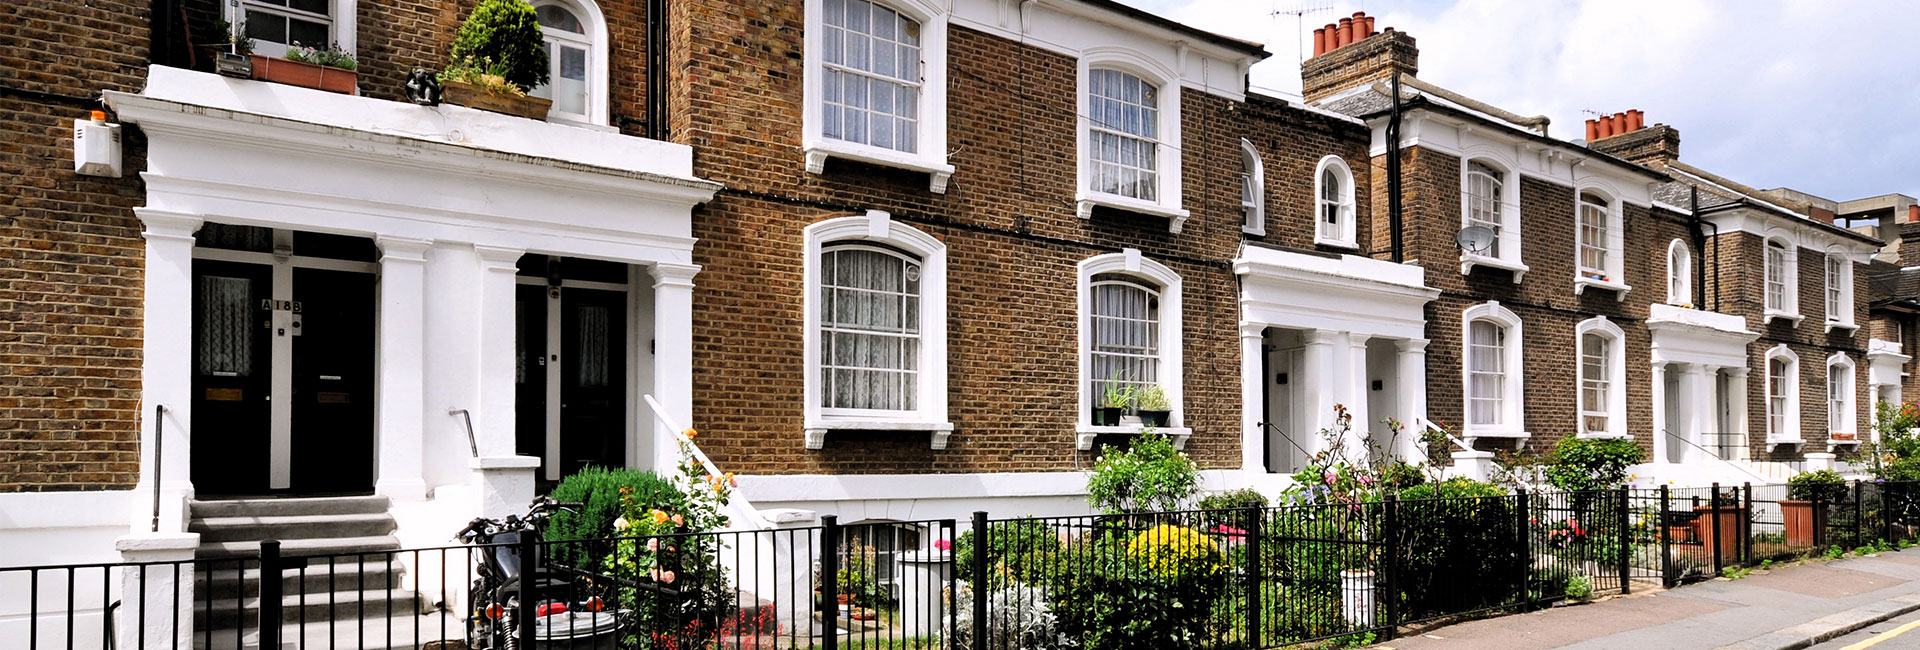 UK property market review from the Property Activity Index